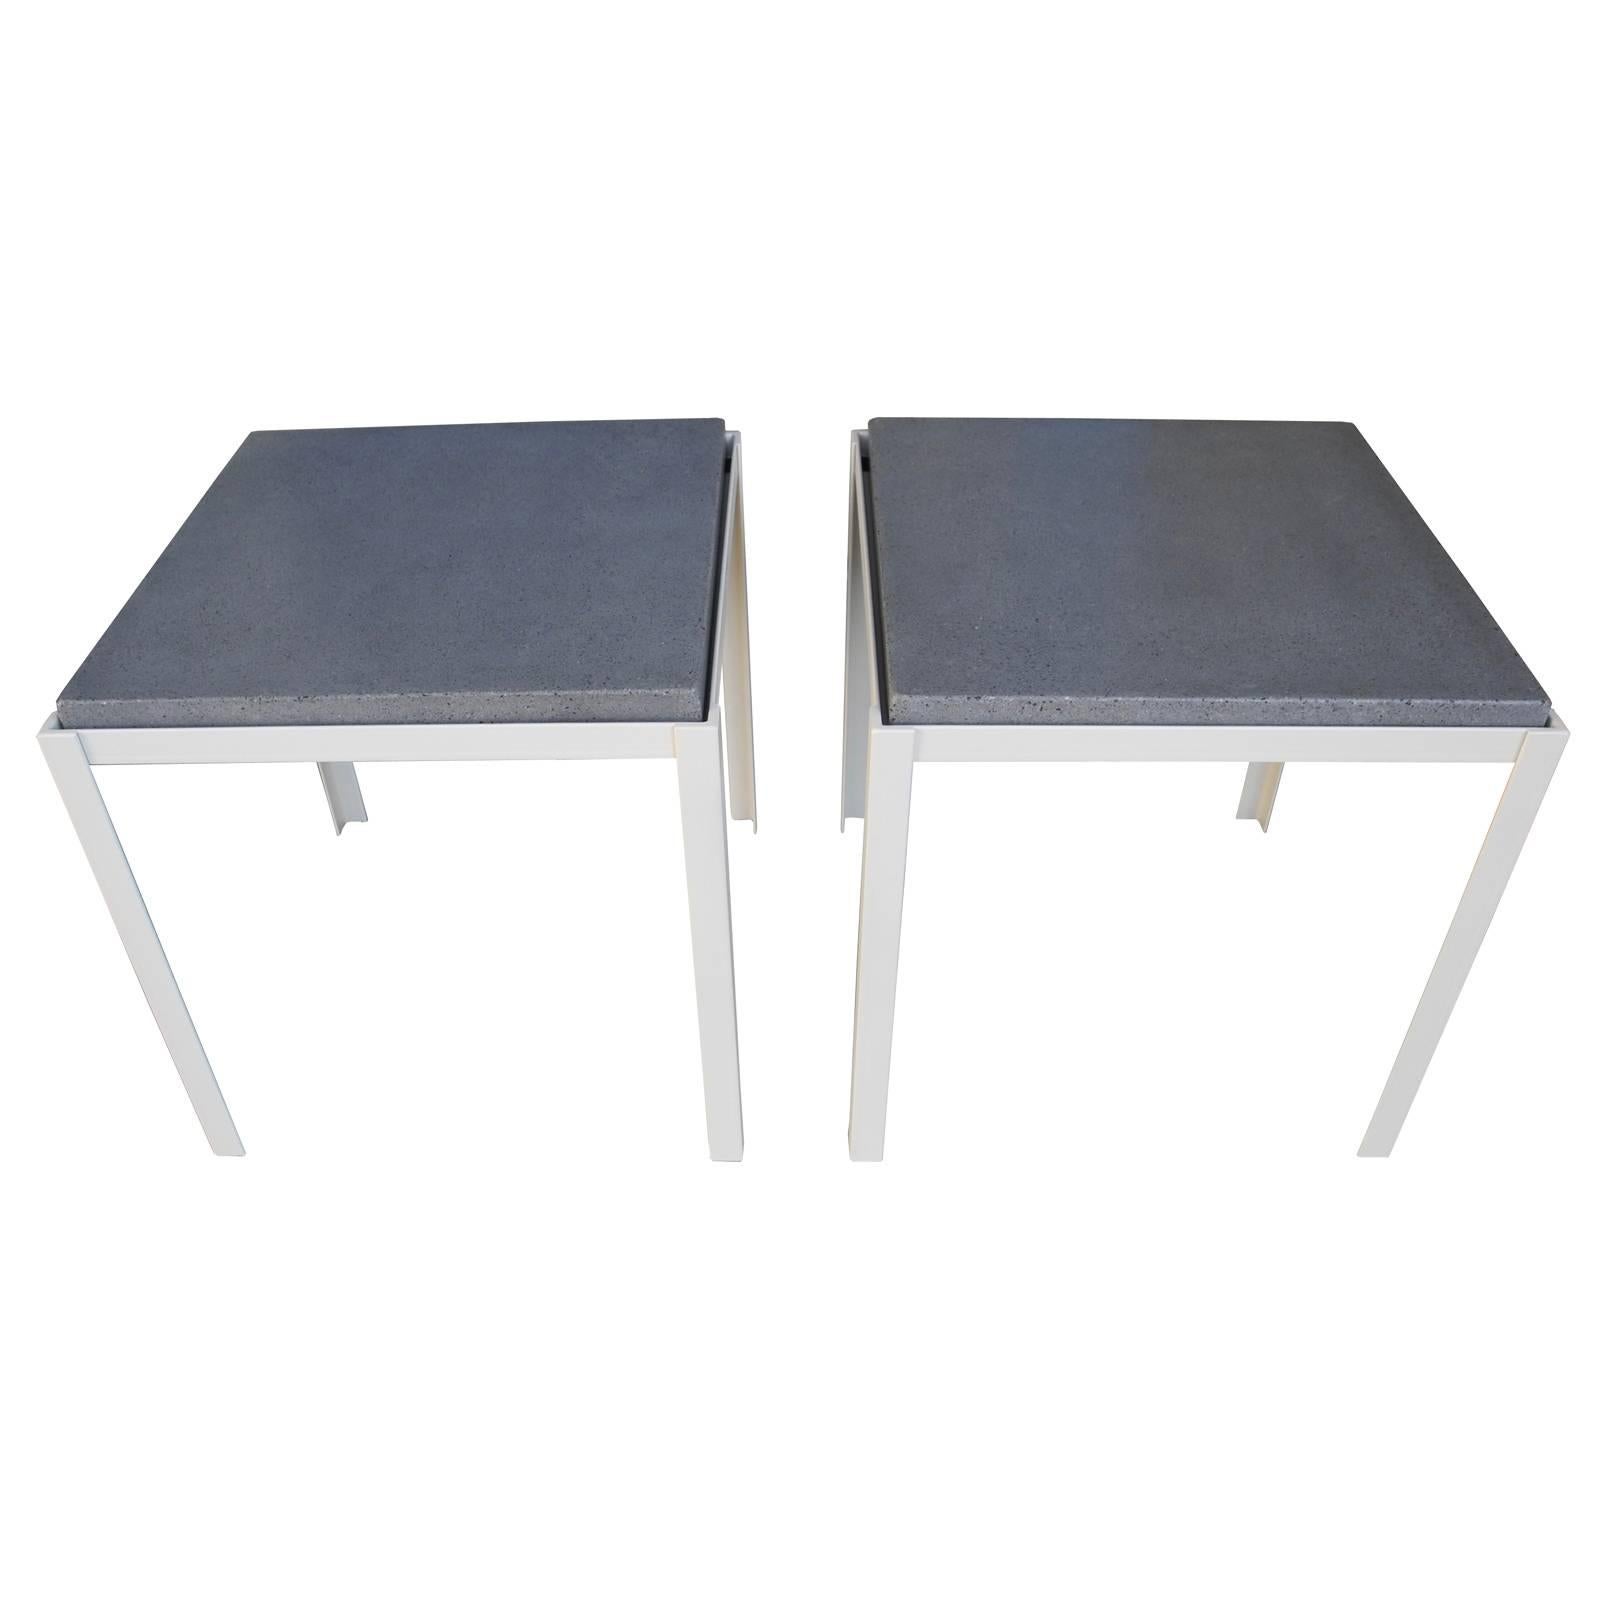 Polished Concrete and Welded Steel Night Stands, Coffee Tables, Corinne Robbins im Angebot